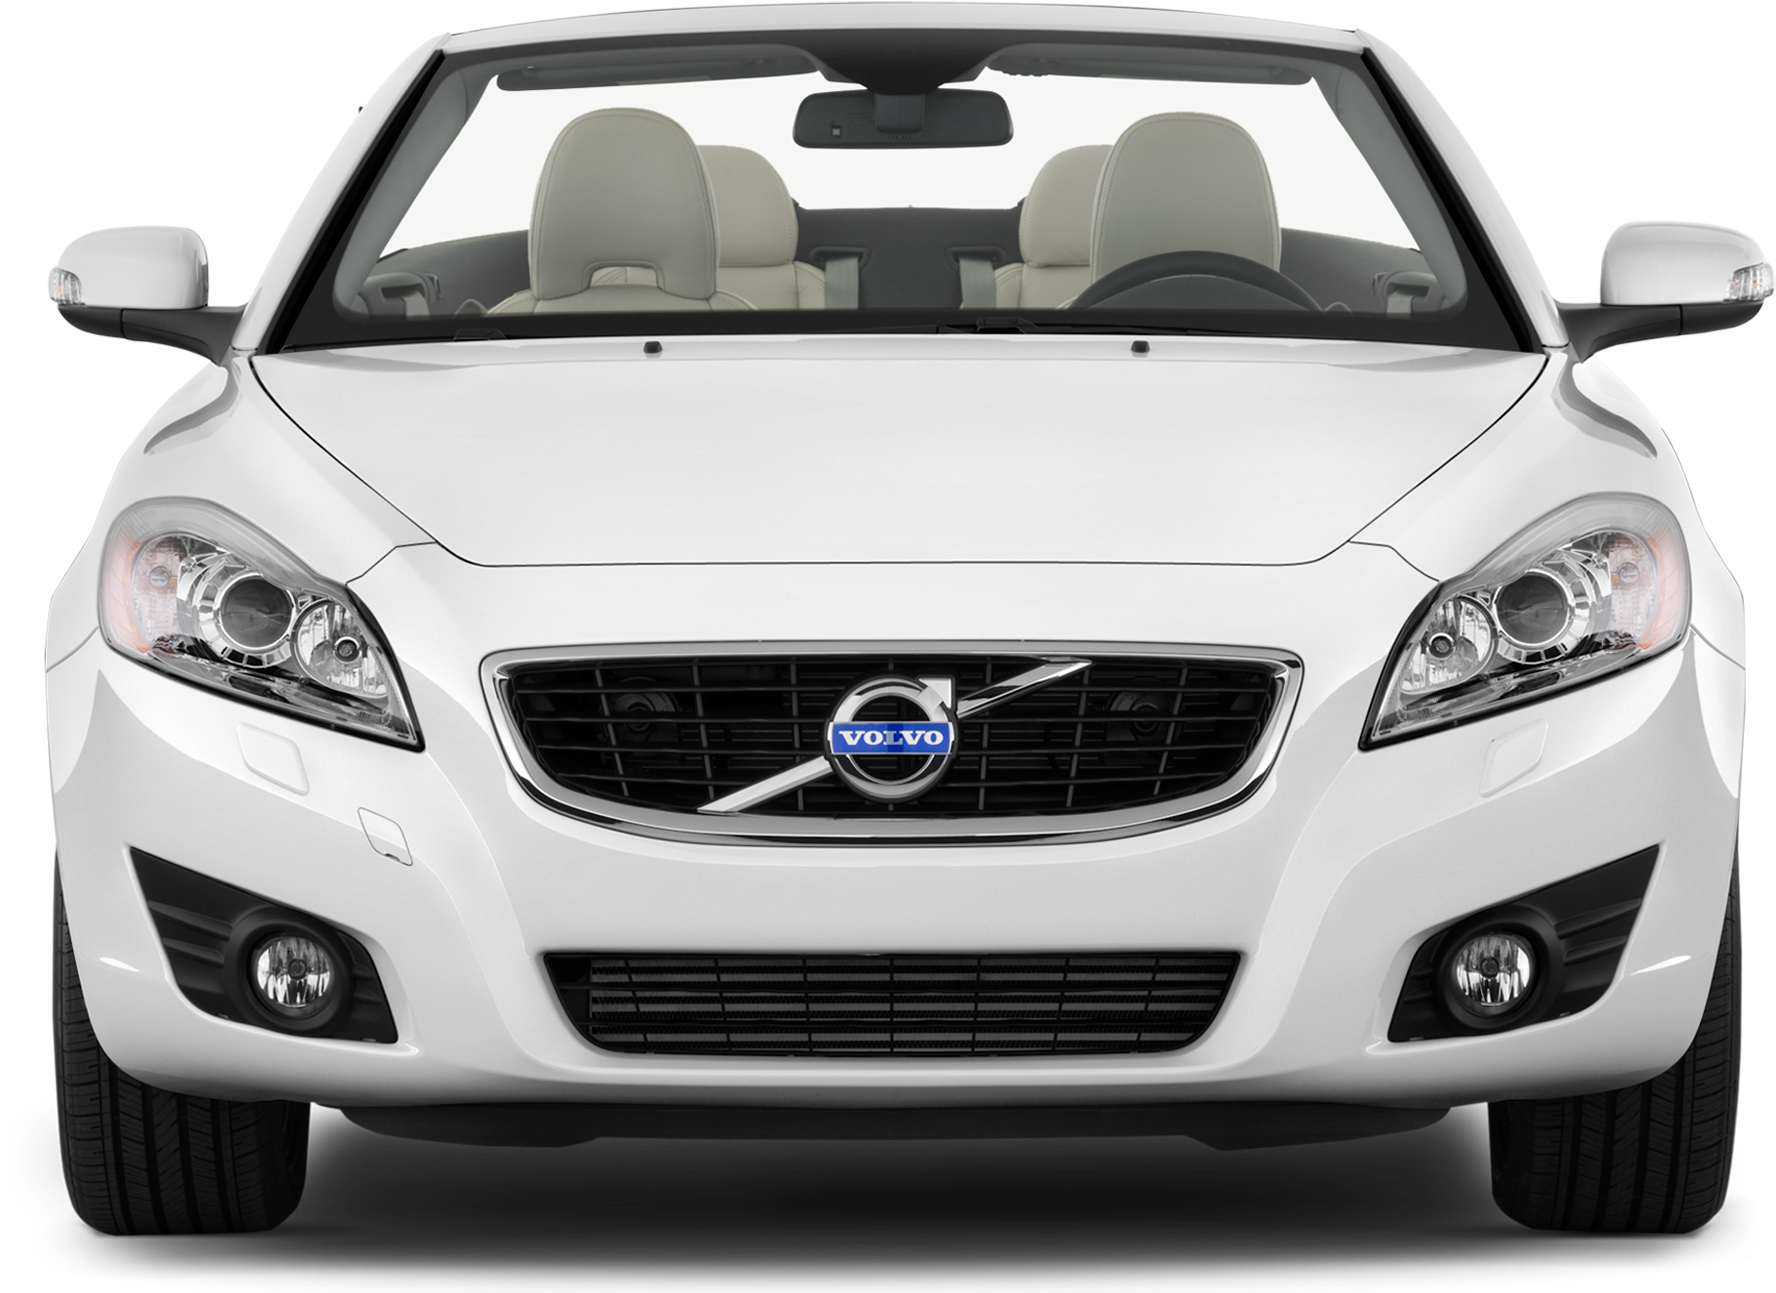 White Volvo Sedan Front View PNG